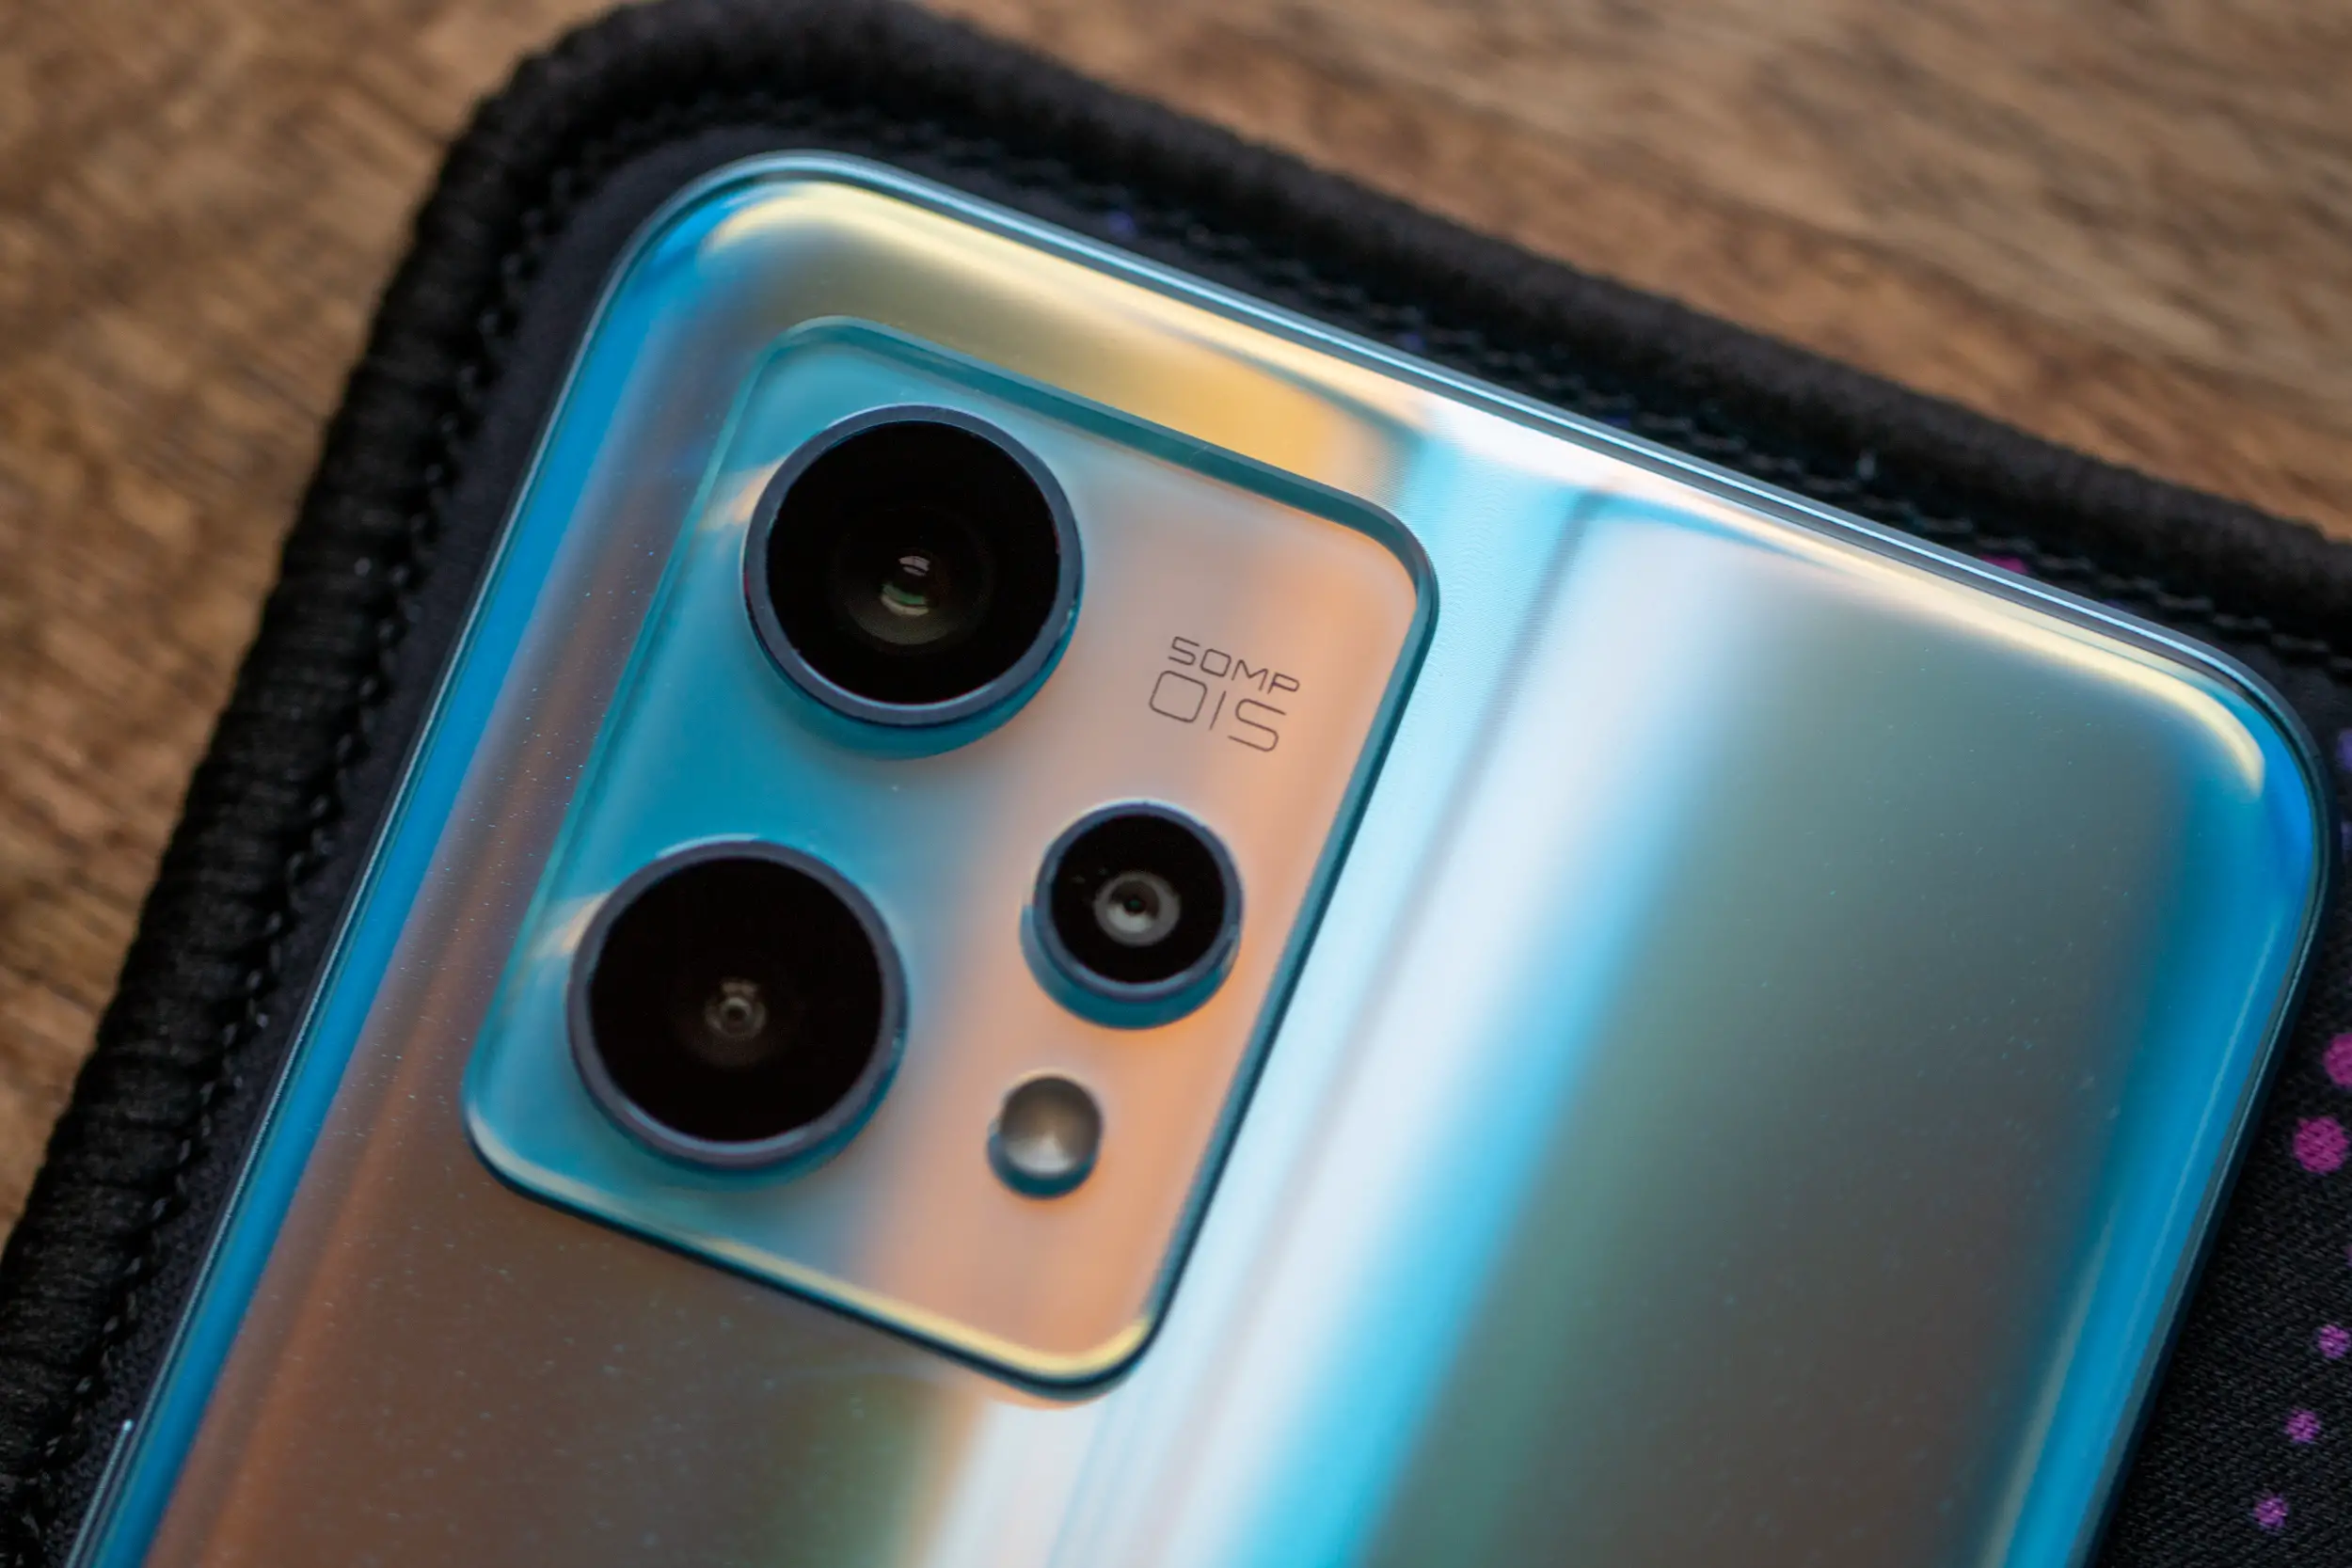 Realme 9 Pro+ review: Great camera, but is that enough?